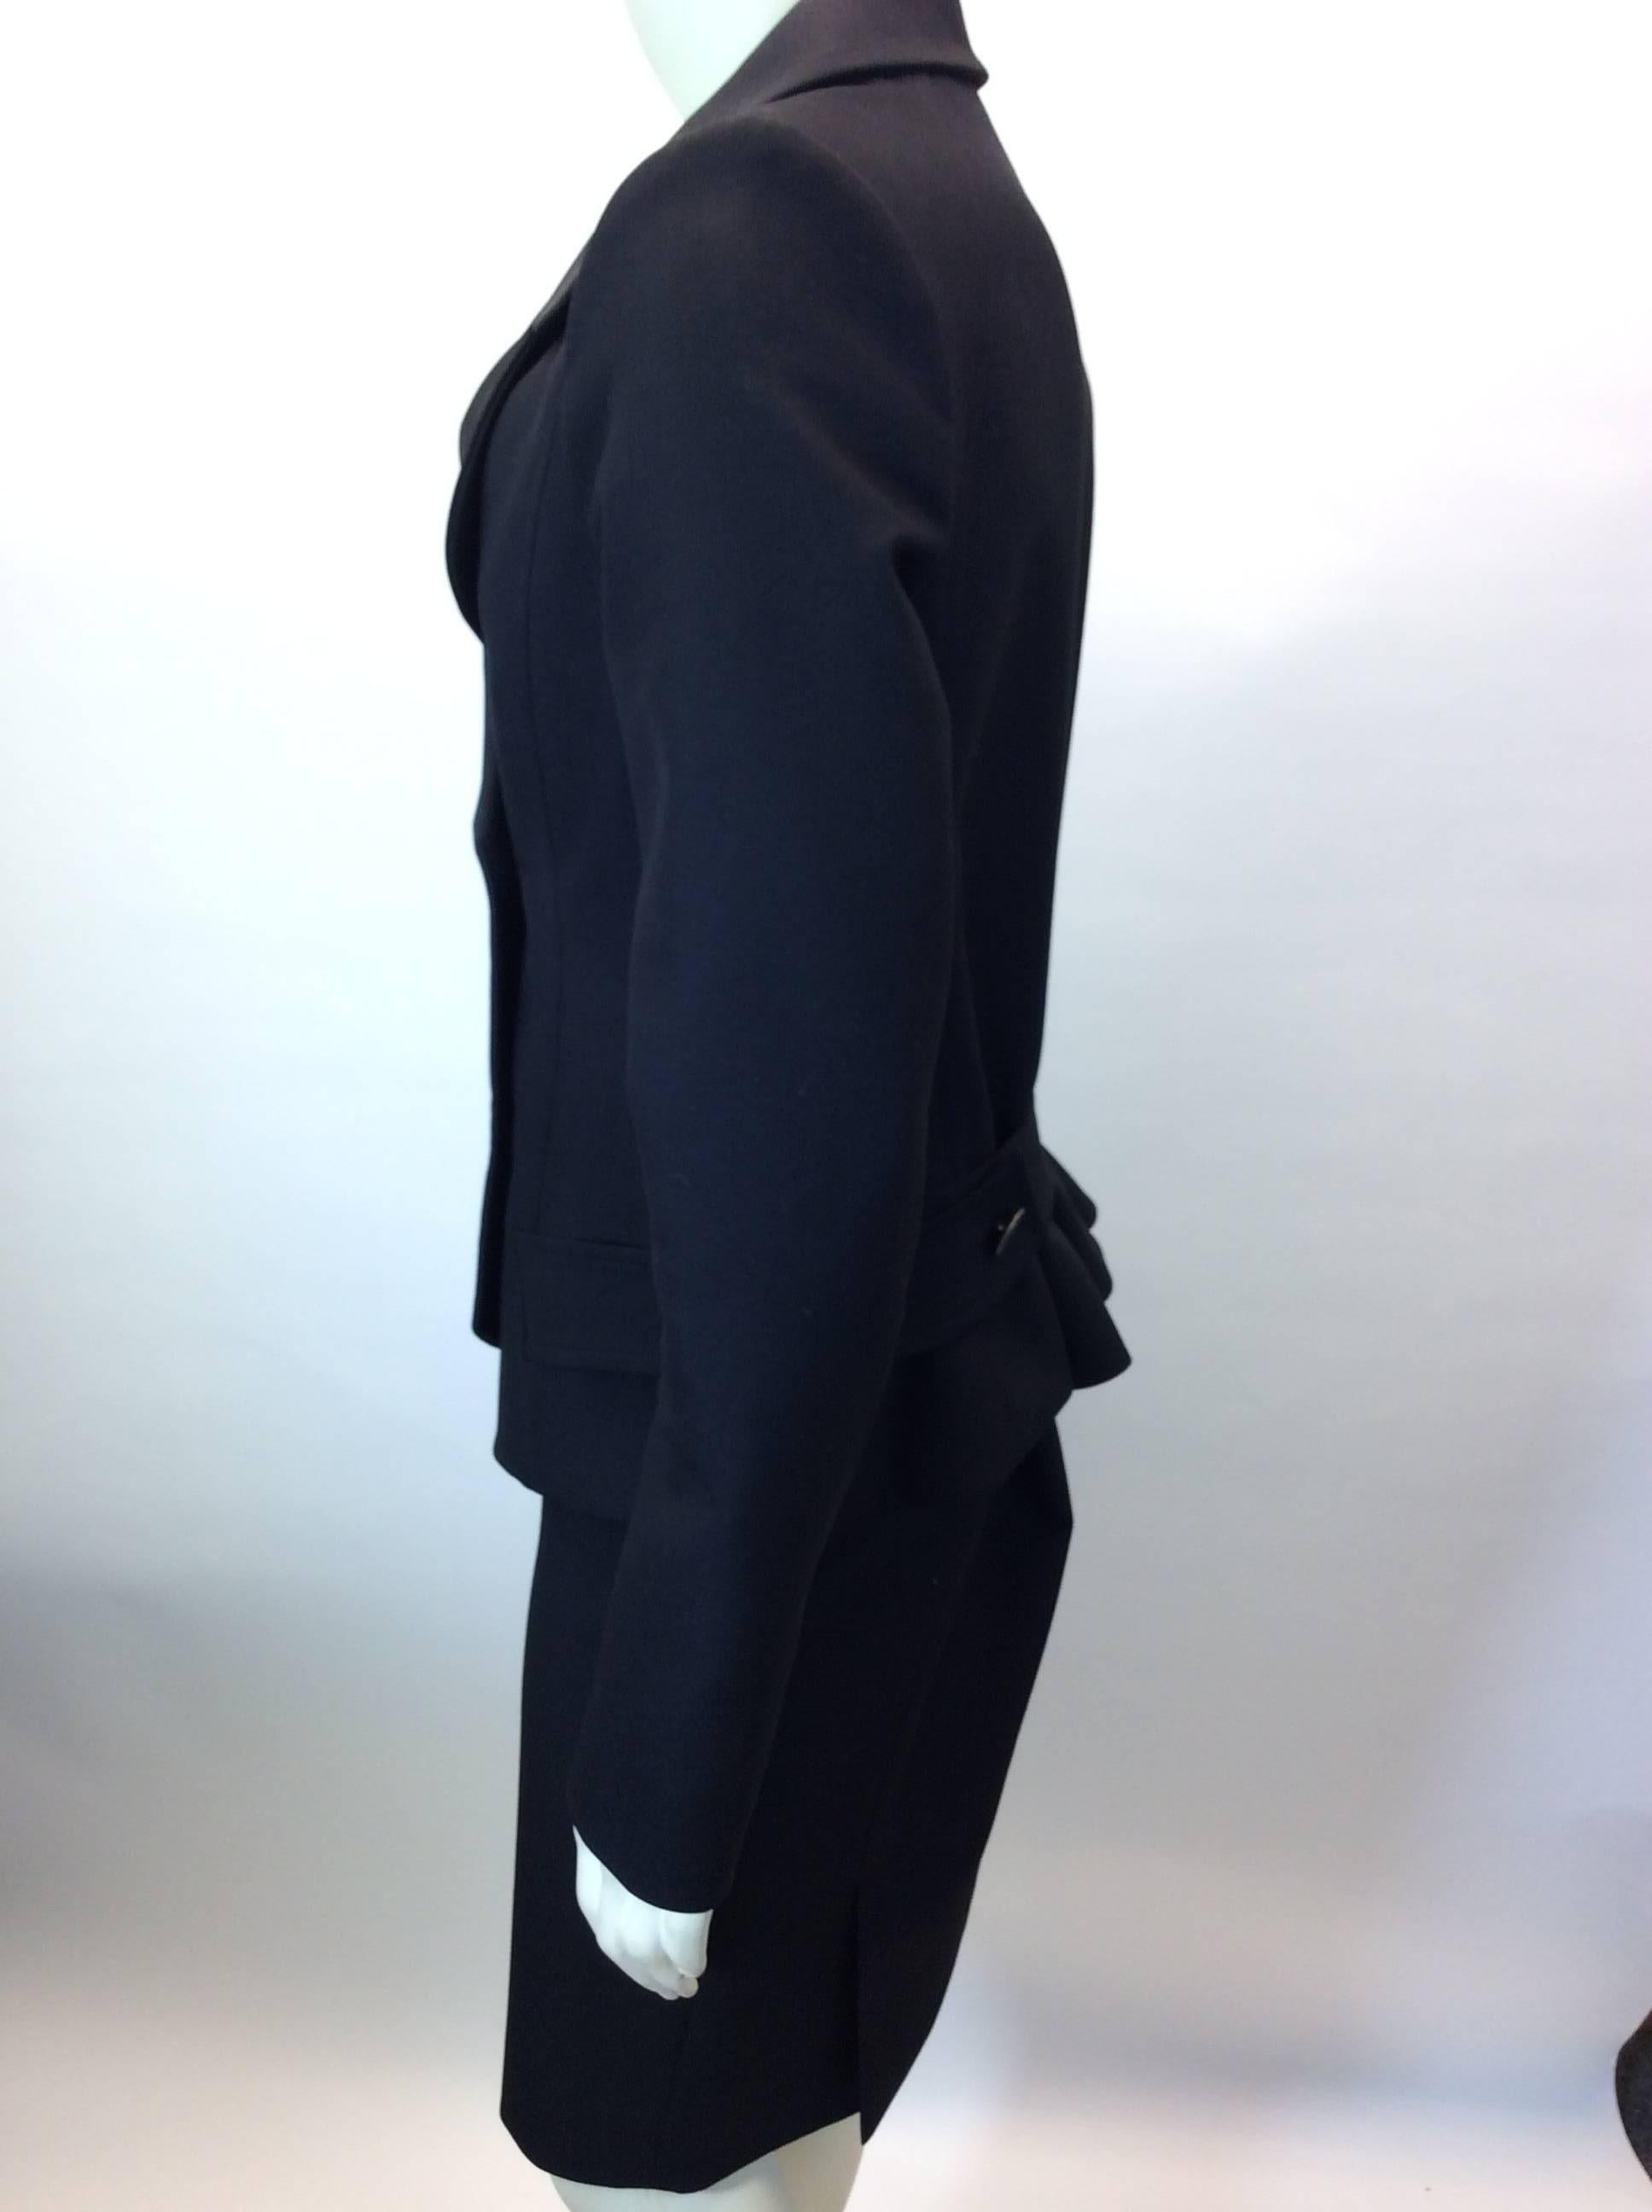 Black Skirt Suit with Peplum Detail
Double breasted blazer with two button closure
Side seam zipper closure on skirt
Blazer features back peplum detail with adjustable belt
Size and fiber content unknown (refer to measurements)